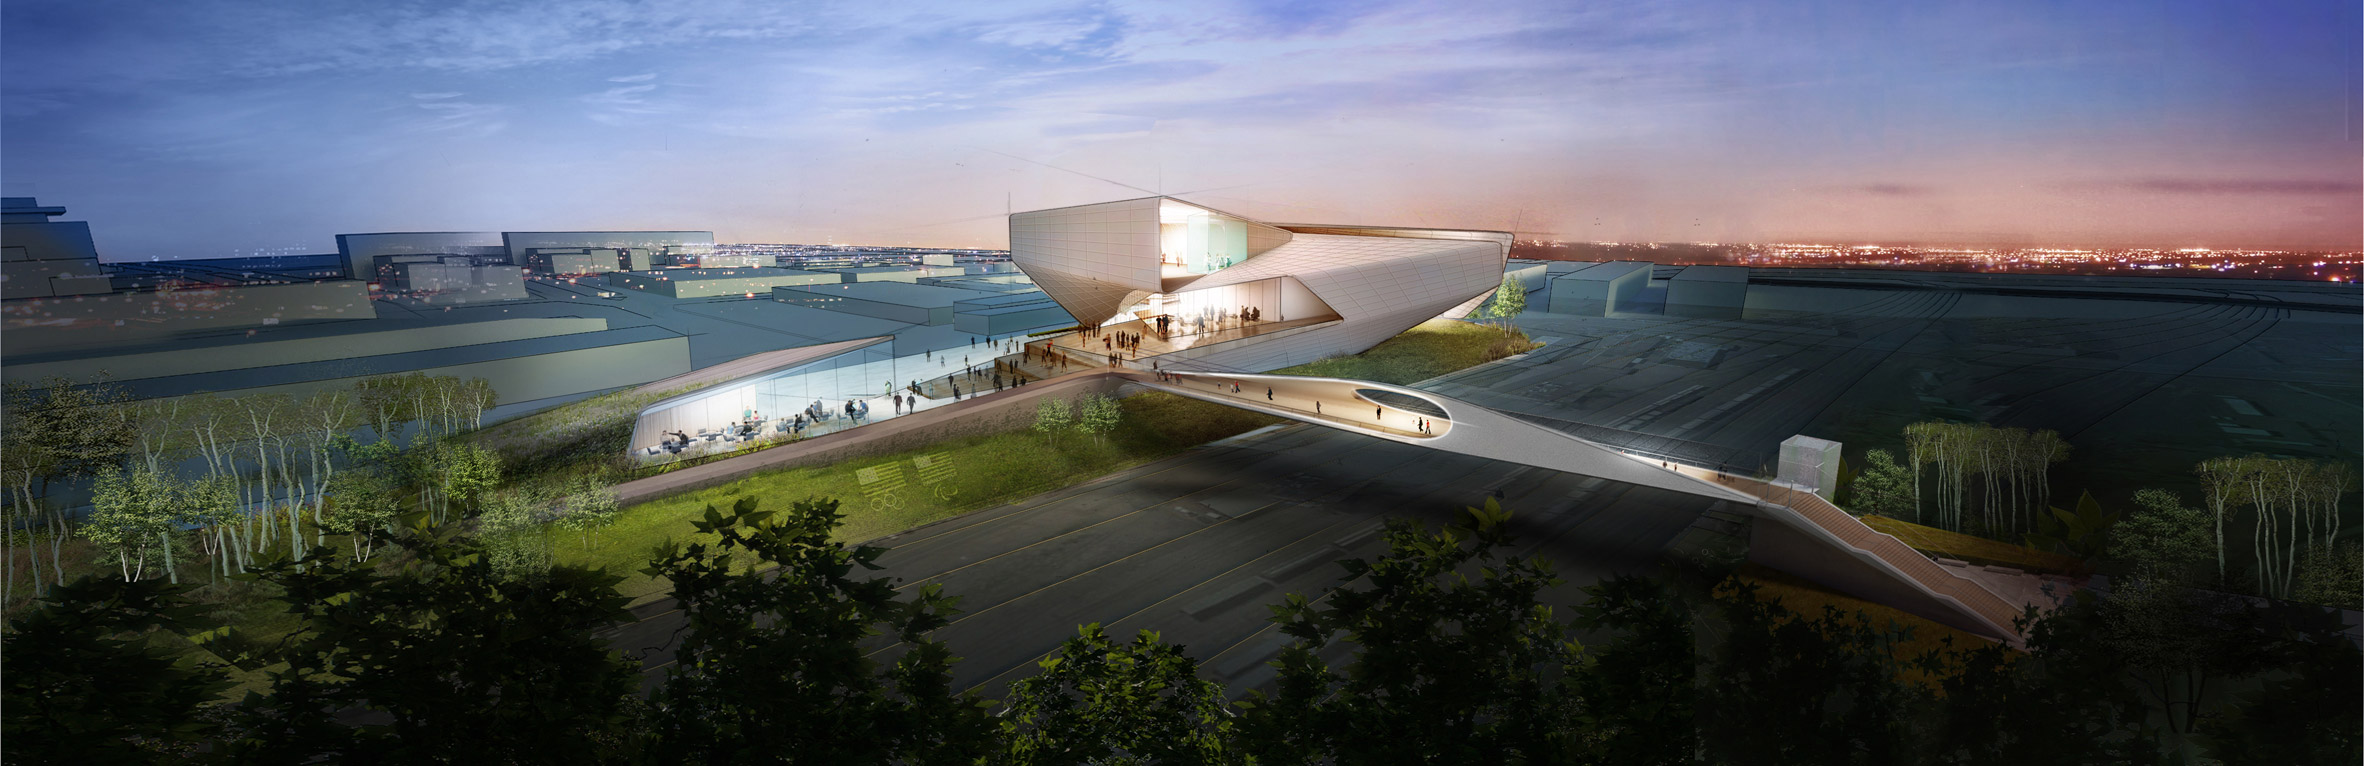 US Olympic Museum by Diller, Scofido + Renfro